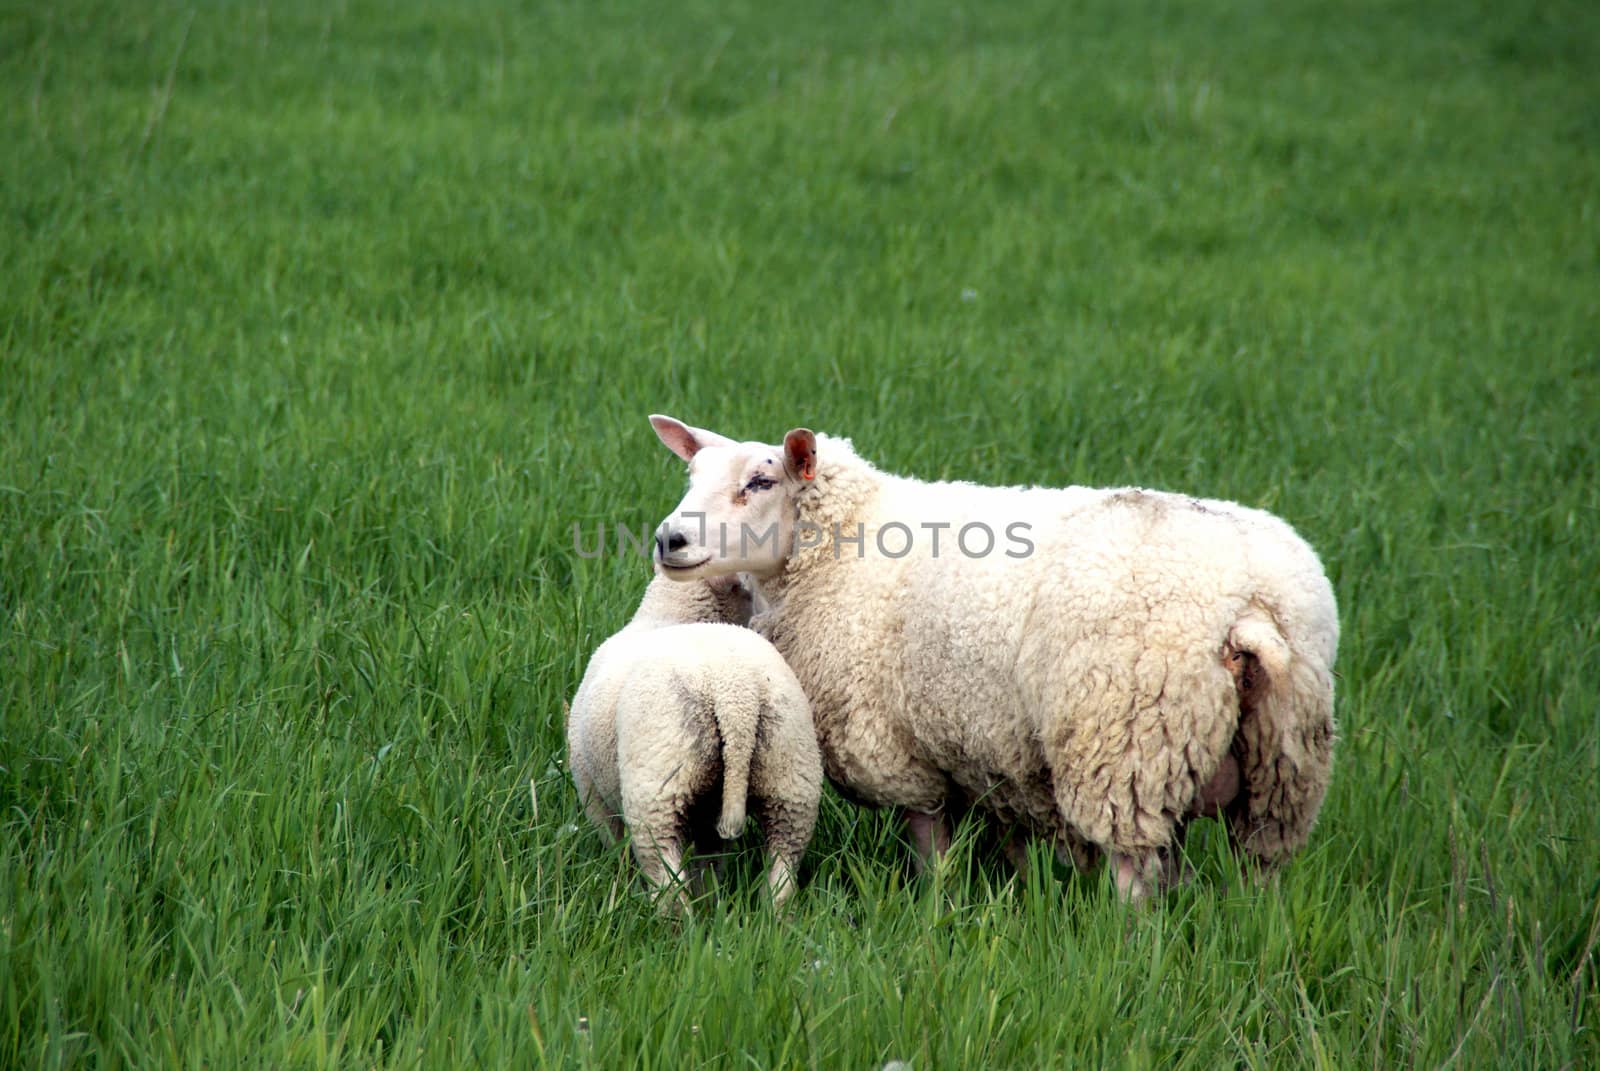 Ewe and lamb on a green meadow in the summer.